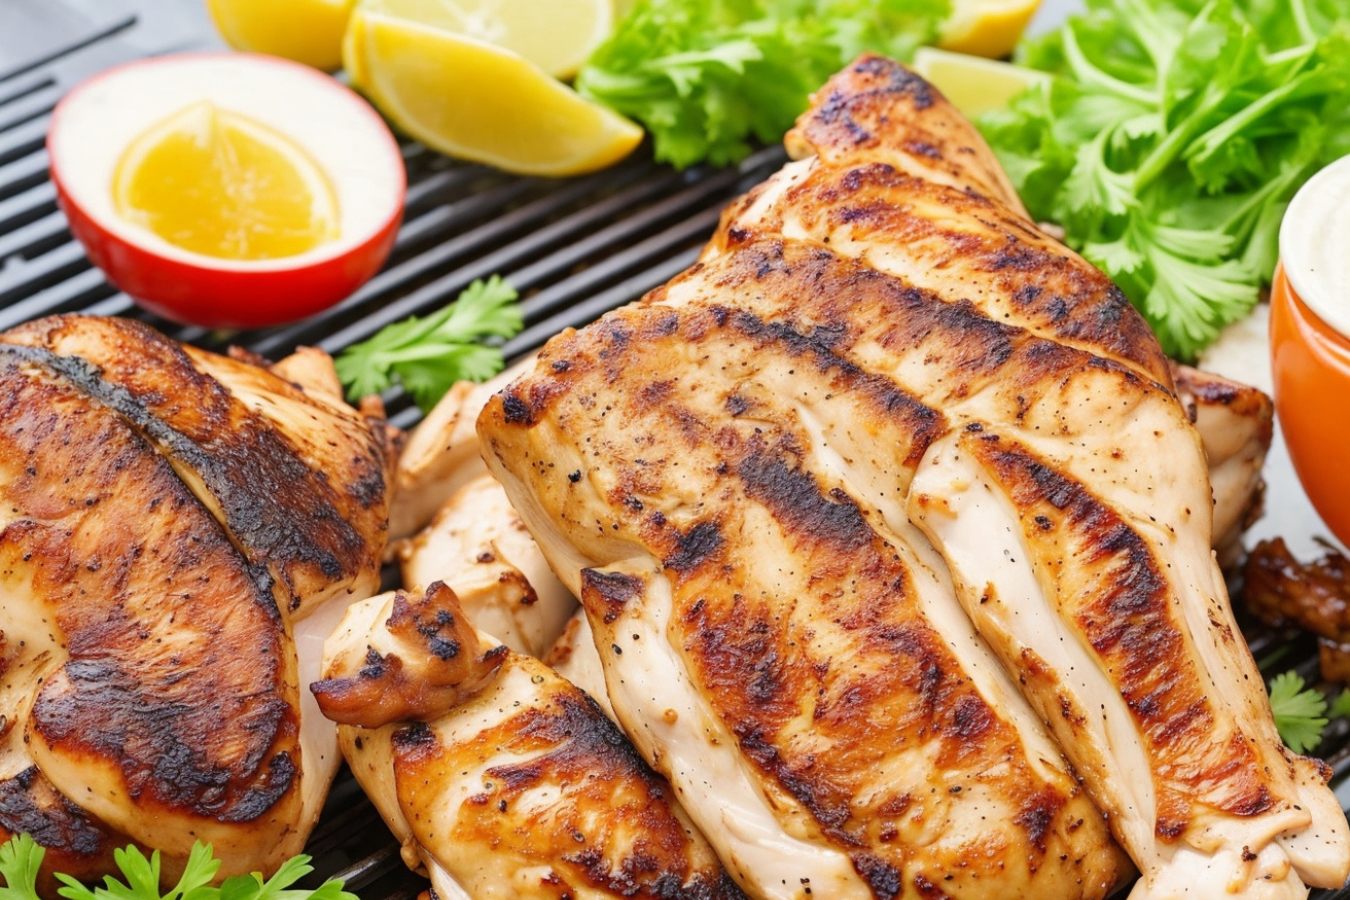 Comparing Direct vs Indirect Grilling Chicken